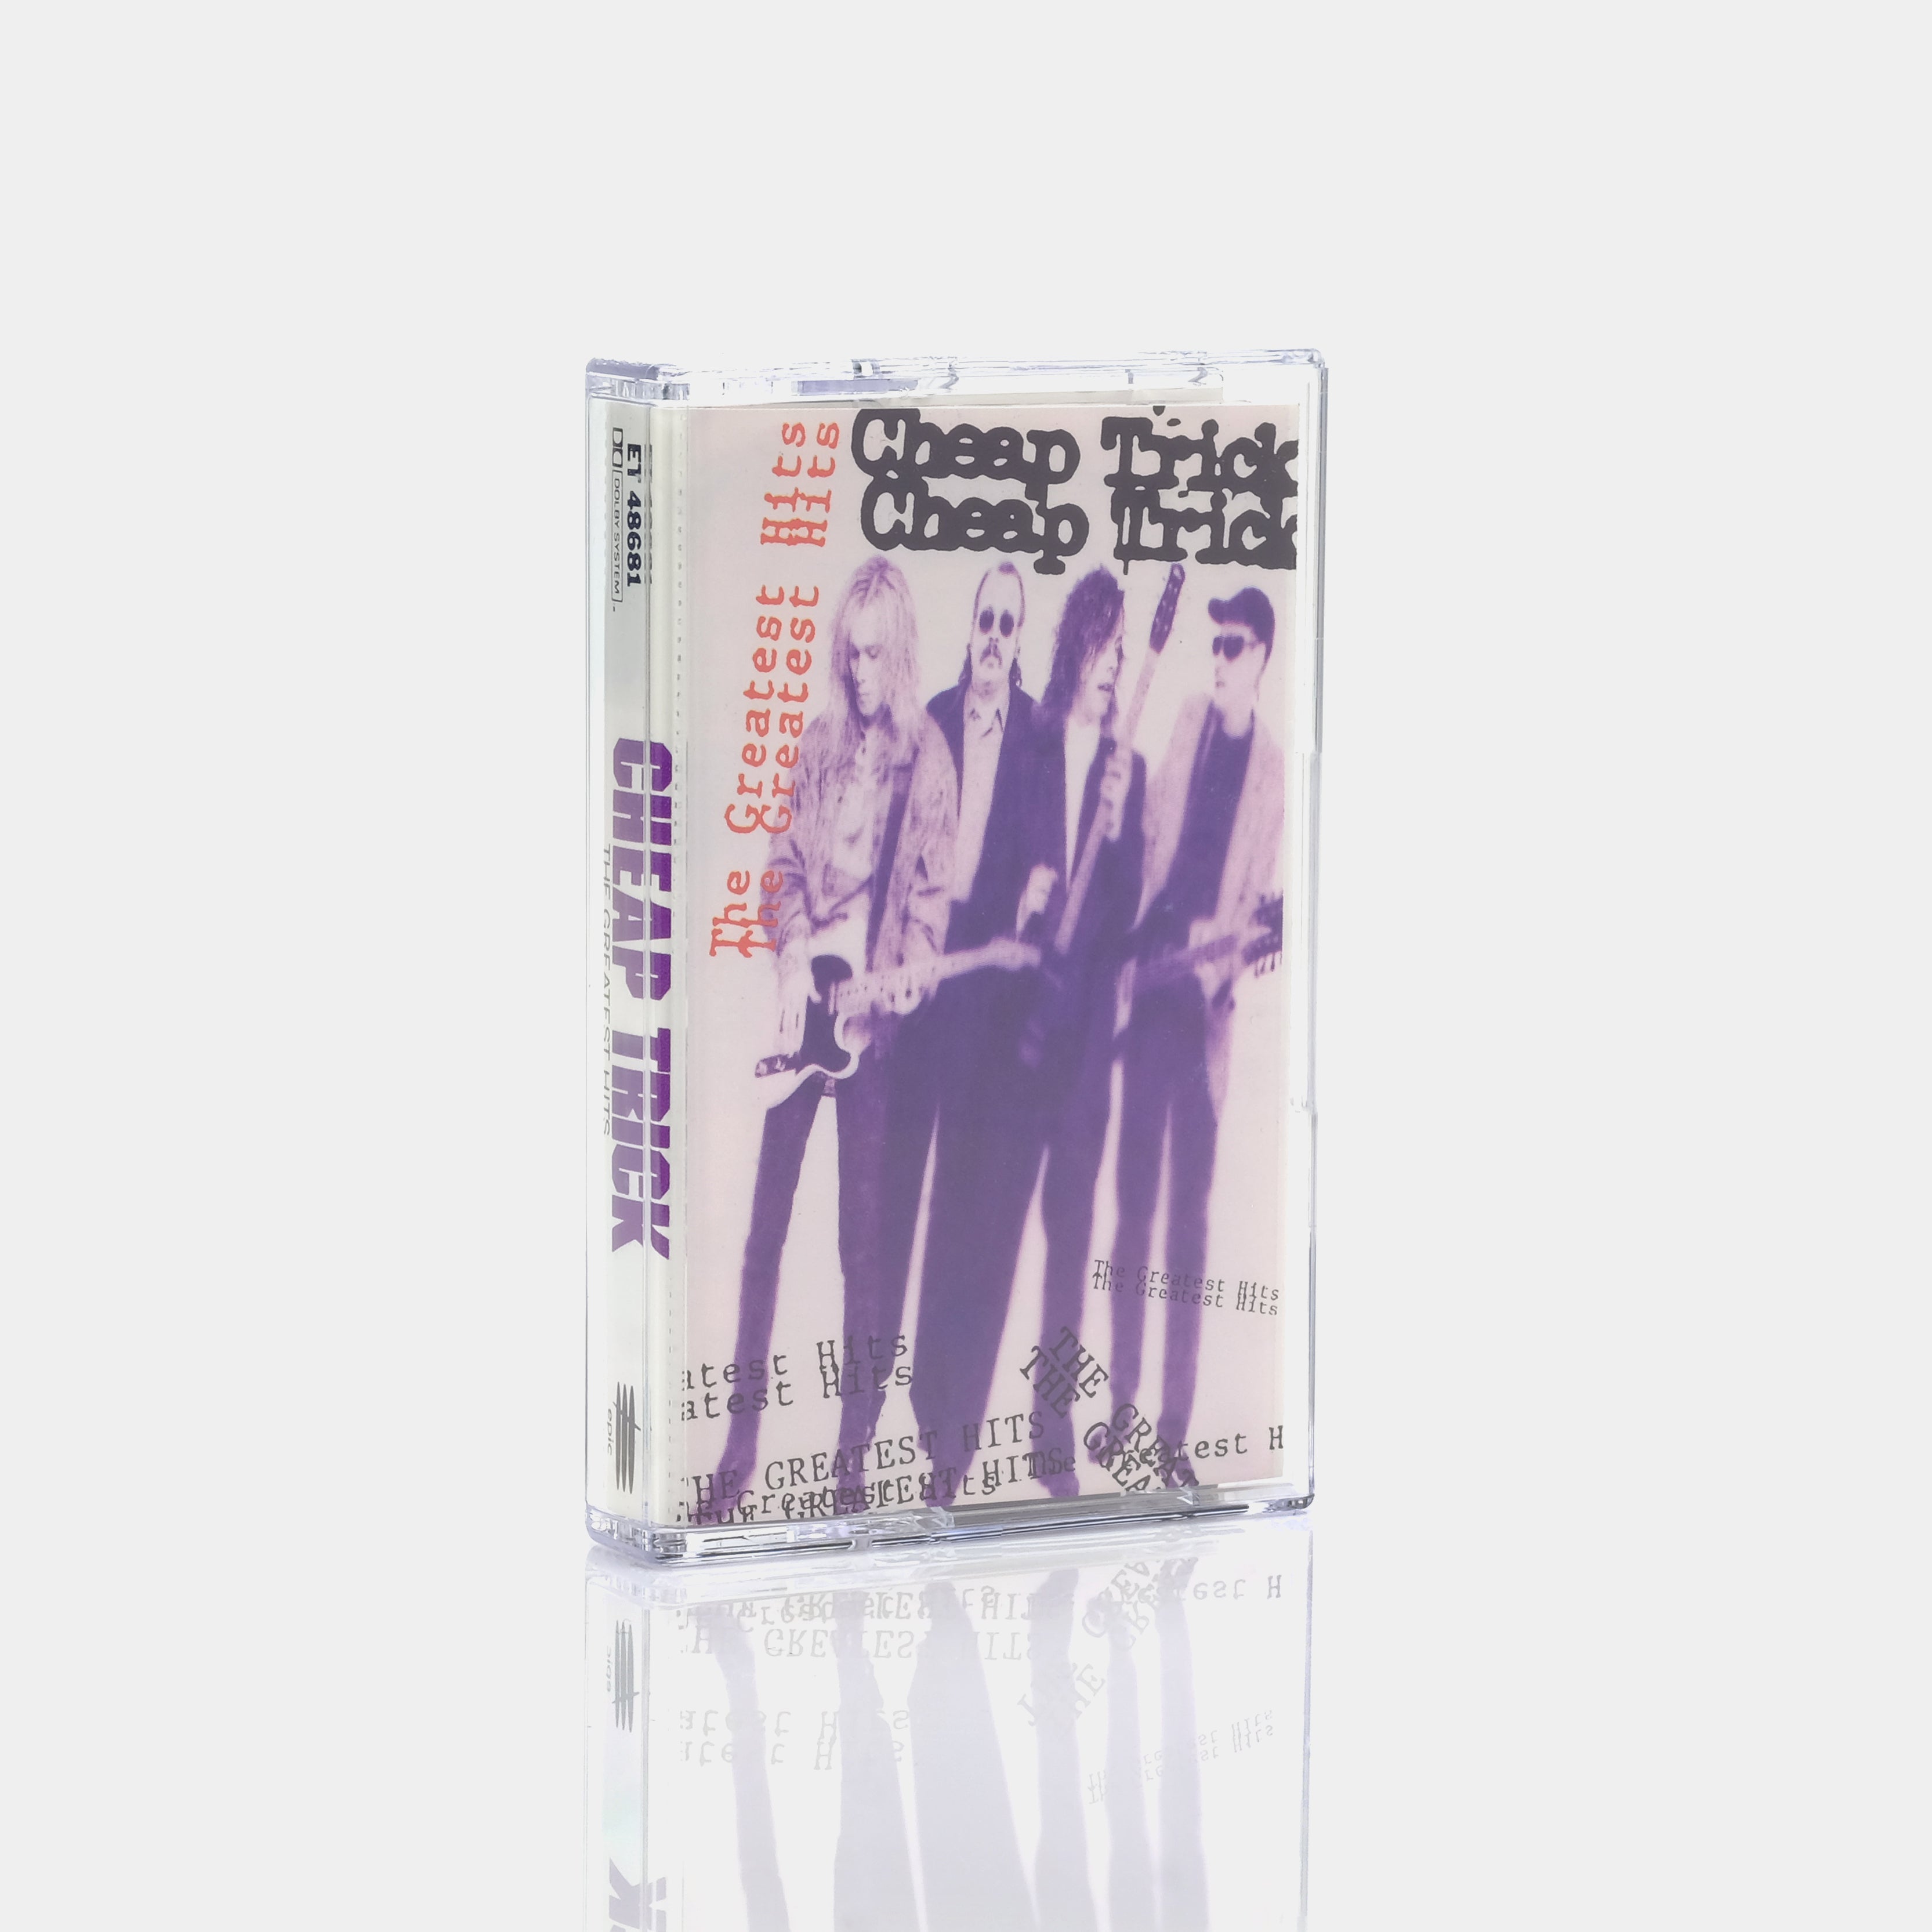 Cheap Trick - Greatest Hits Cassette Tape